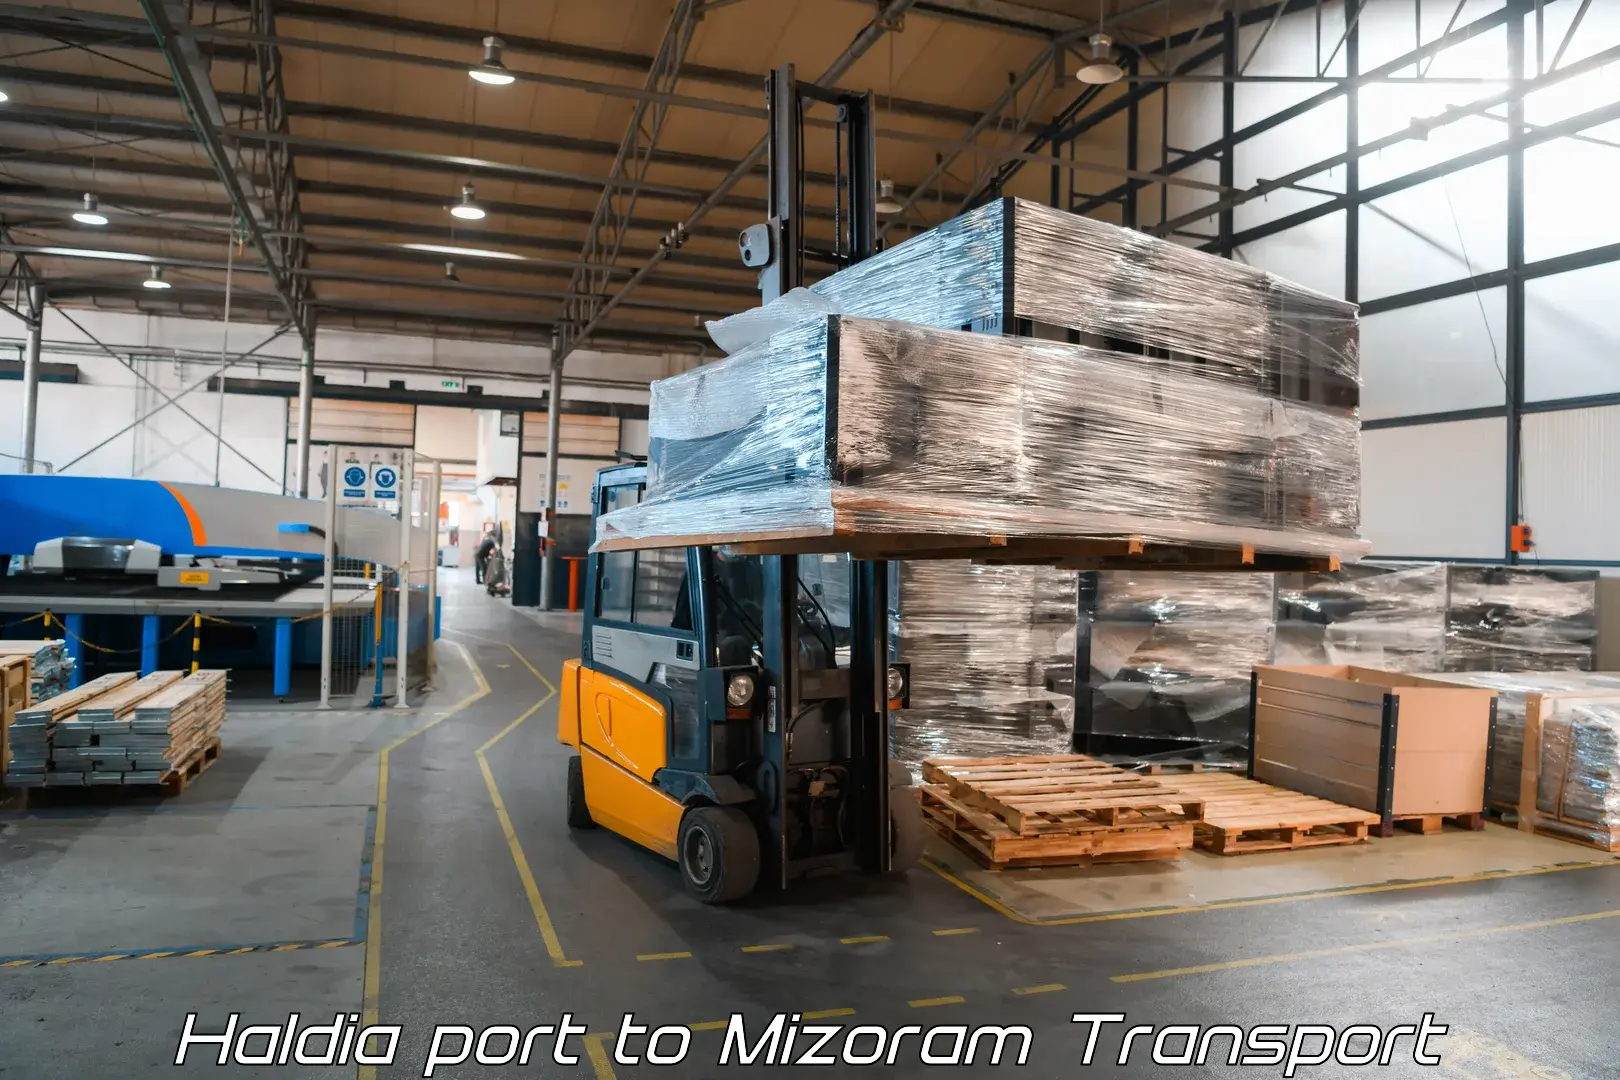 Transport bike from one state to another Haldia port to Mizoram